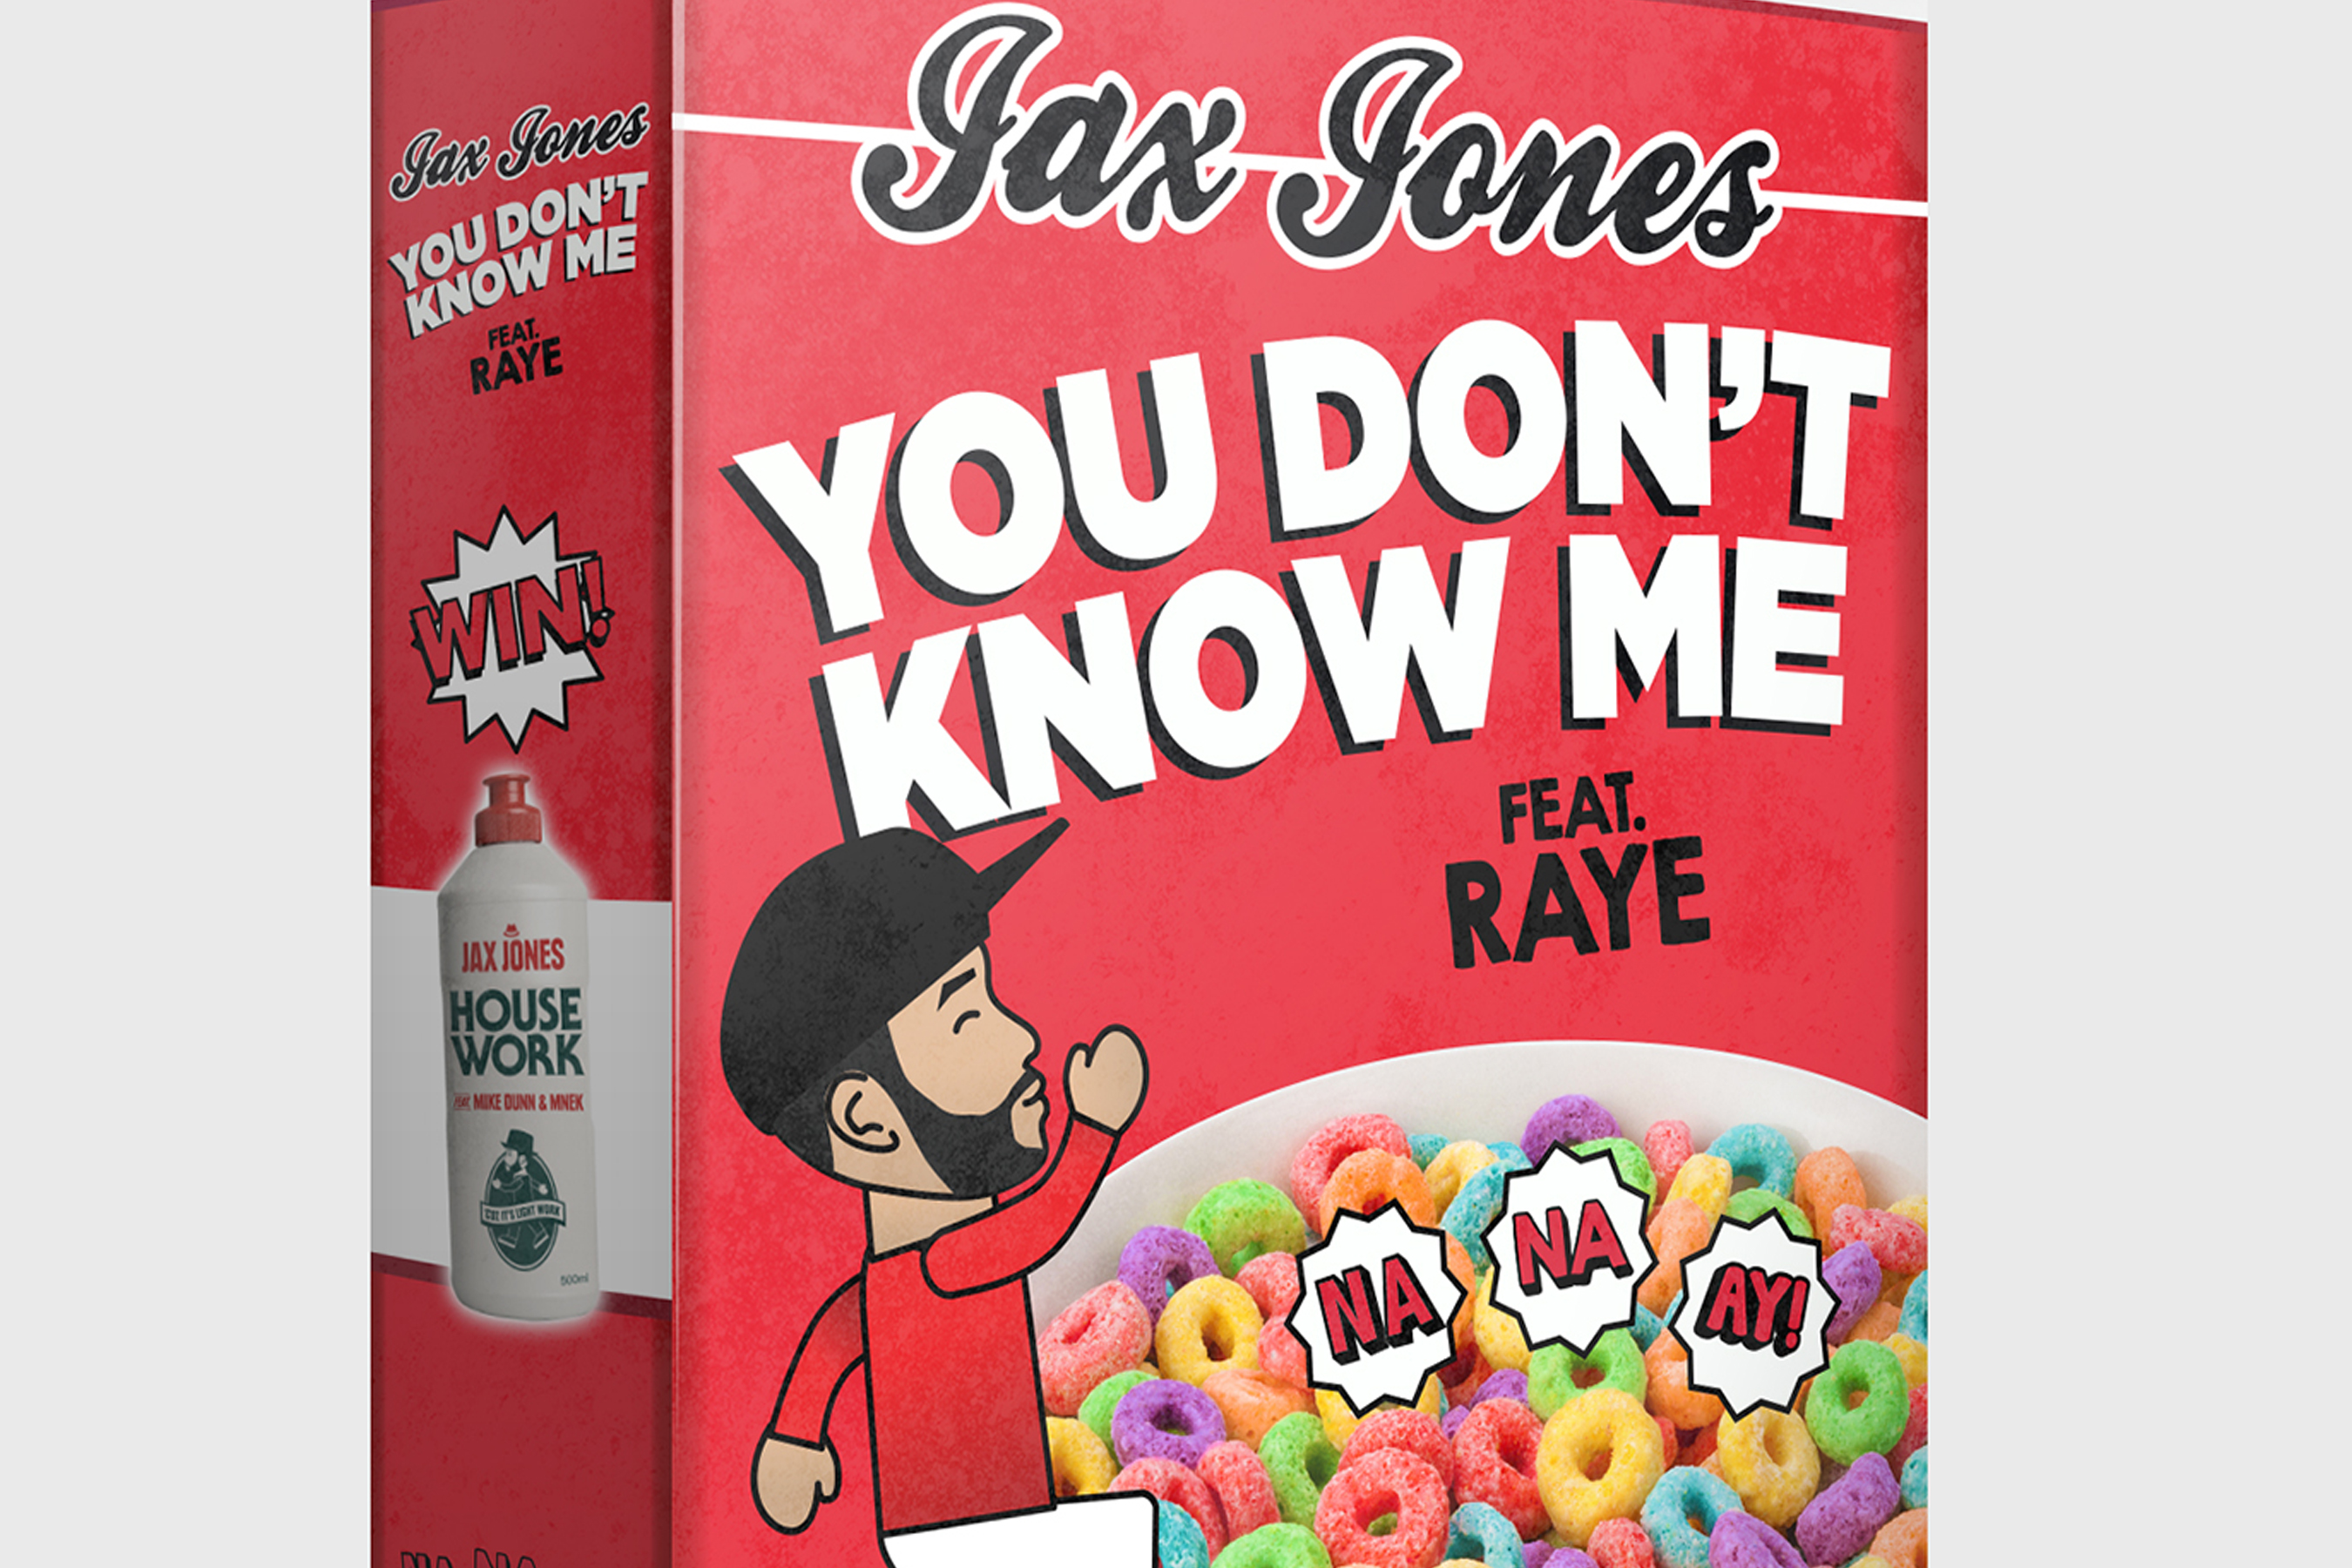 Oh you don t know me. Raye you don't know me. Jax Jones feat. Raye. Jax Jones you don't know me ft. Raye. Обложка you don't know me.